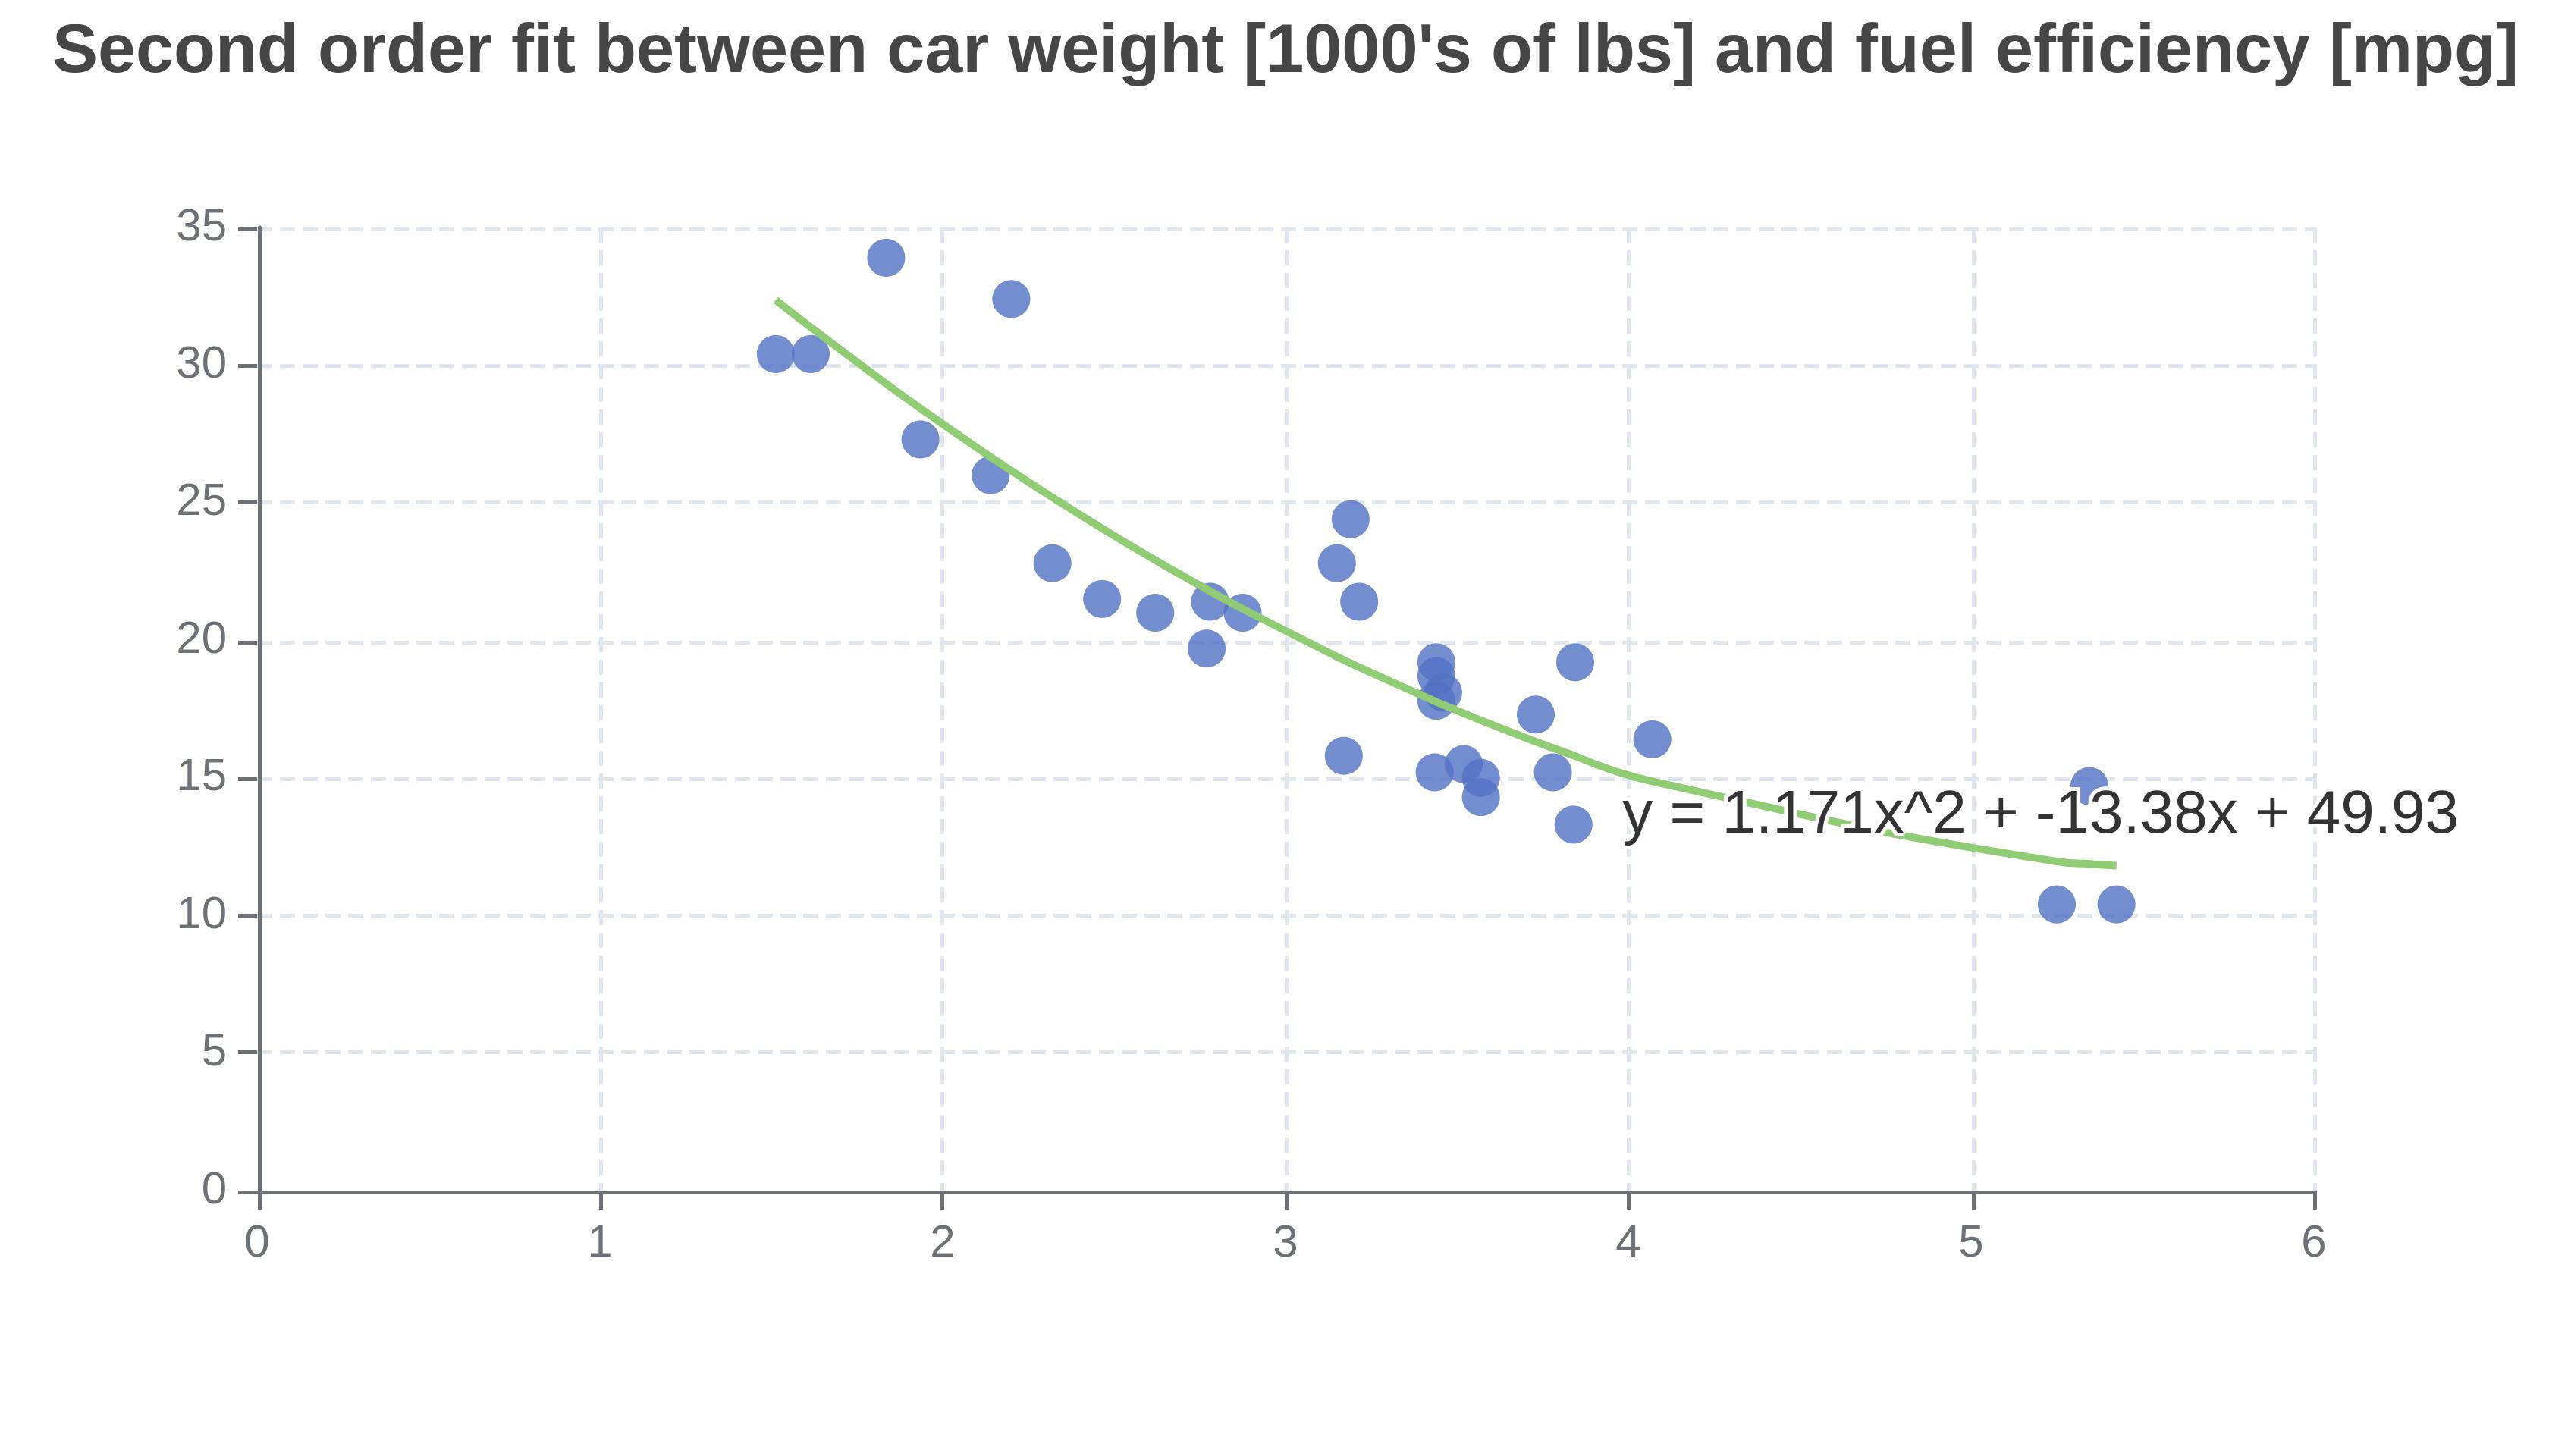 Second order fit between car weight and fuel efficiency